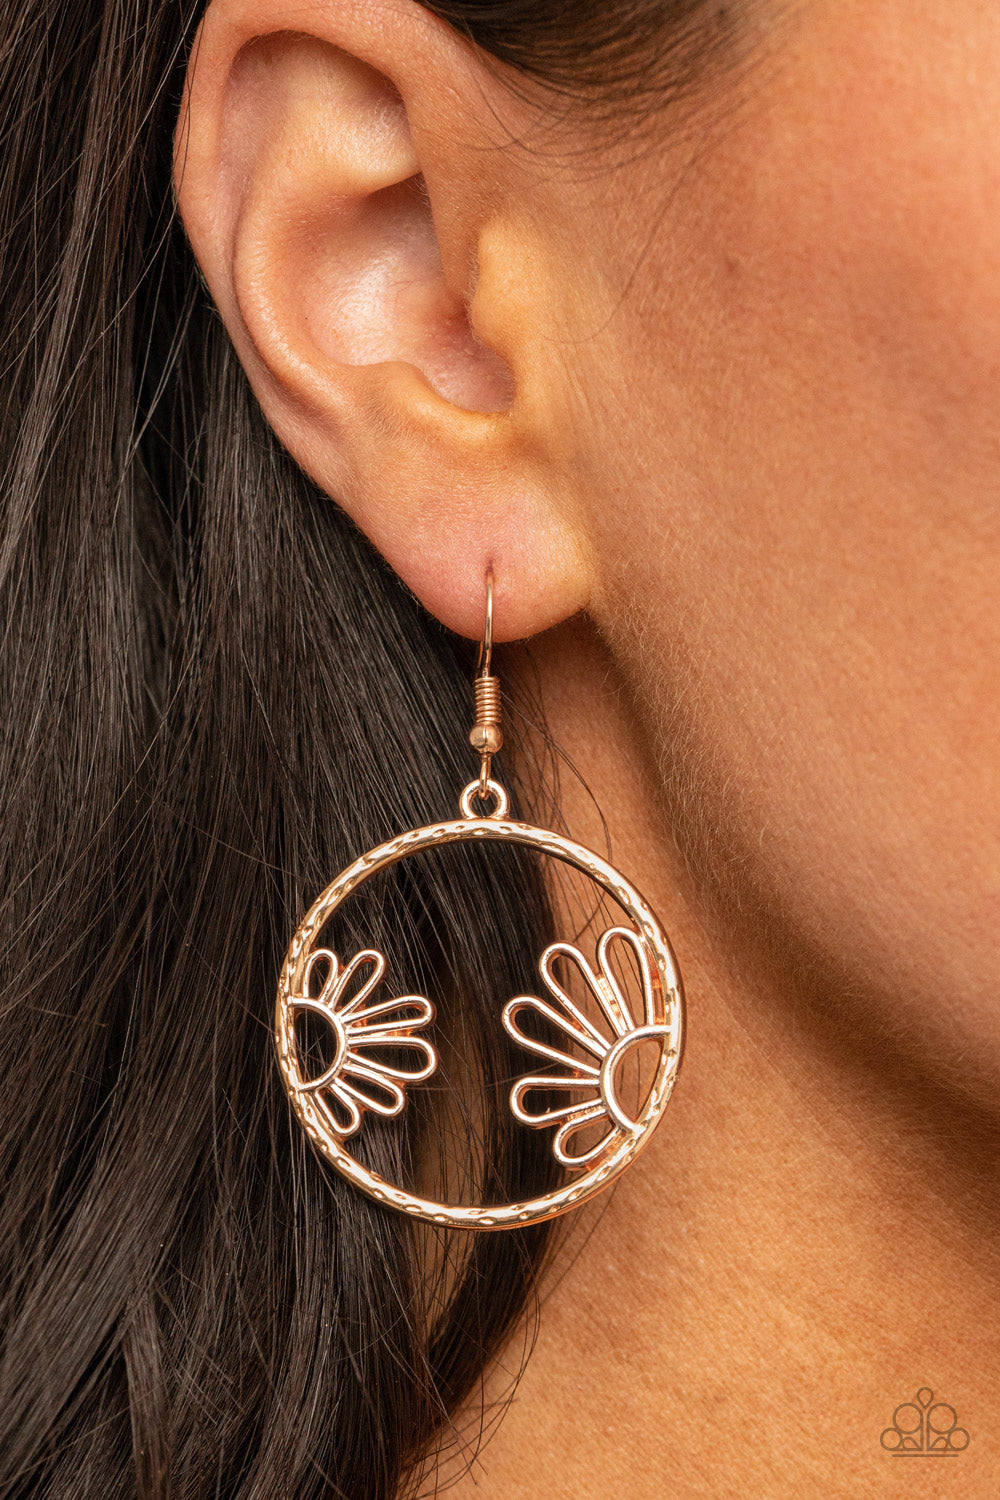 Paparazzi Accessories - Demurely Daisy #E530 - Rose Gold Earrings